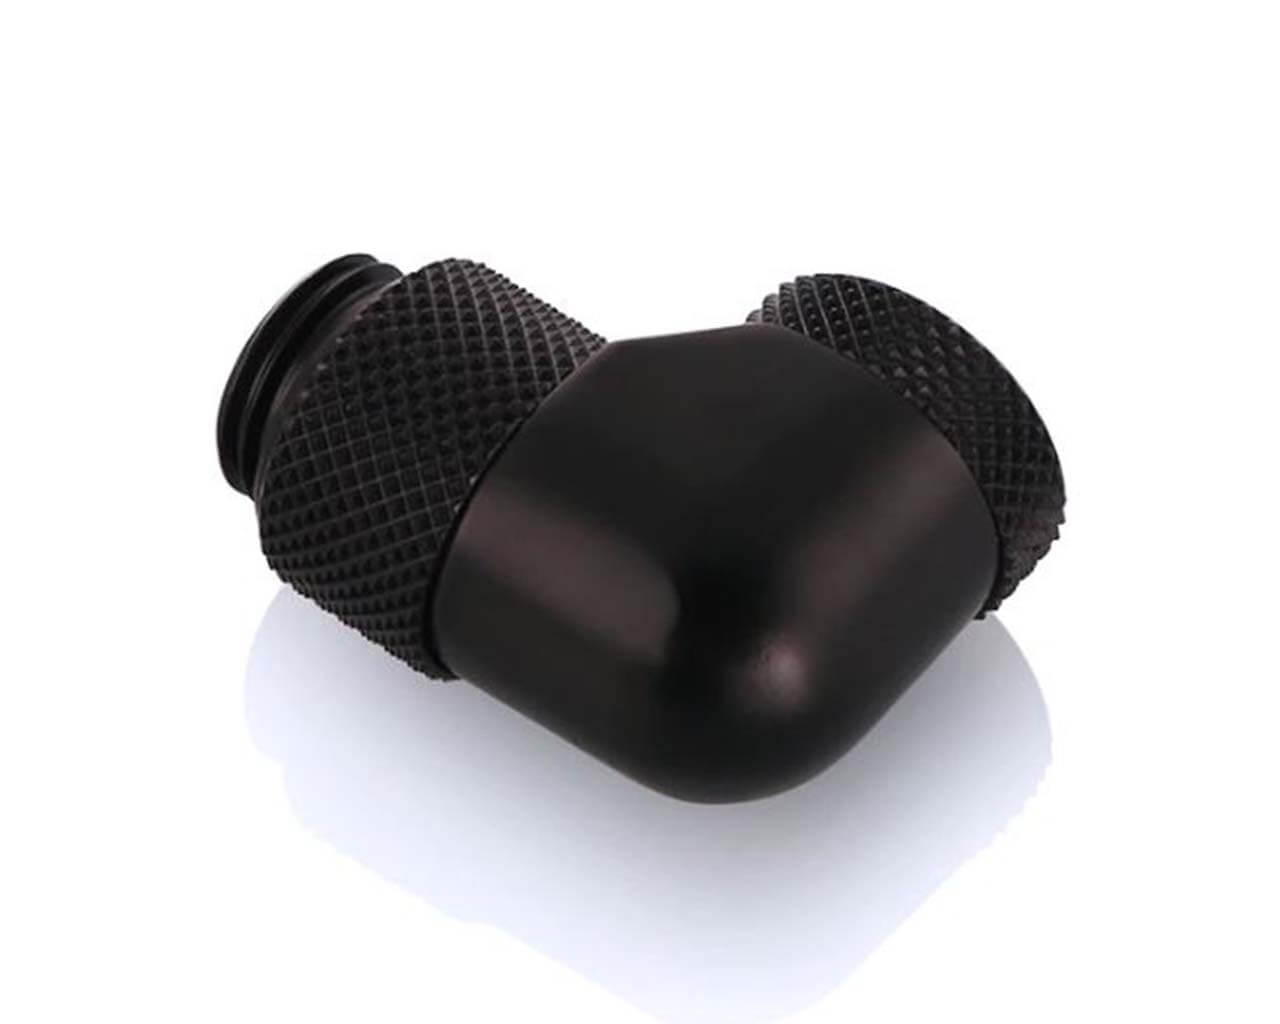 Bykski G 1/4in. Male to Female 90 Degree Dual Rotary Elbow Fitting (B-DTSO-RD90) - PrimoChill - KEEPING IT COOL